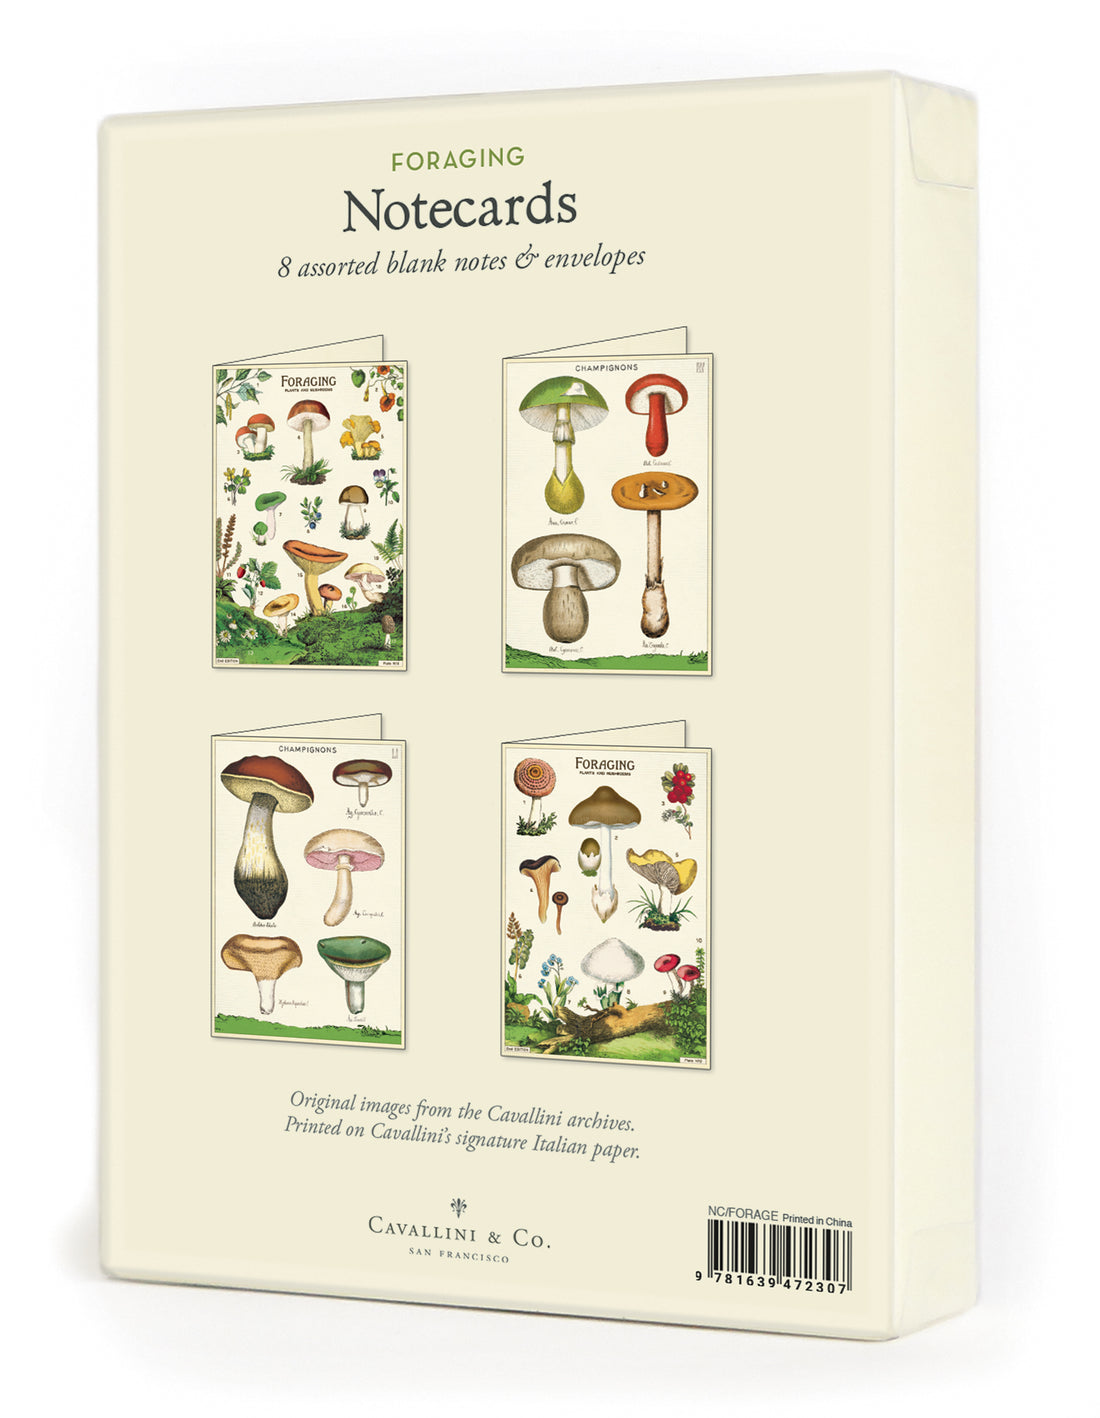 A Foraging Notecards Set of 8 showcasing various illustrated species on the Cavallini Papers &amp; Co cover.